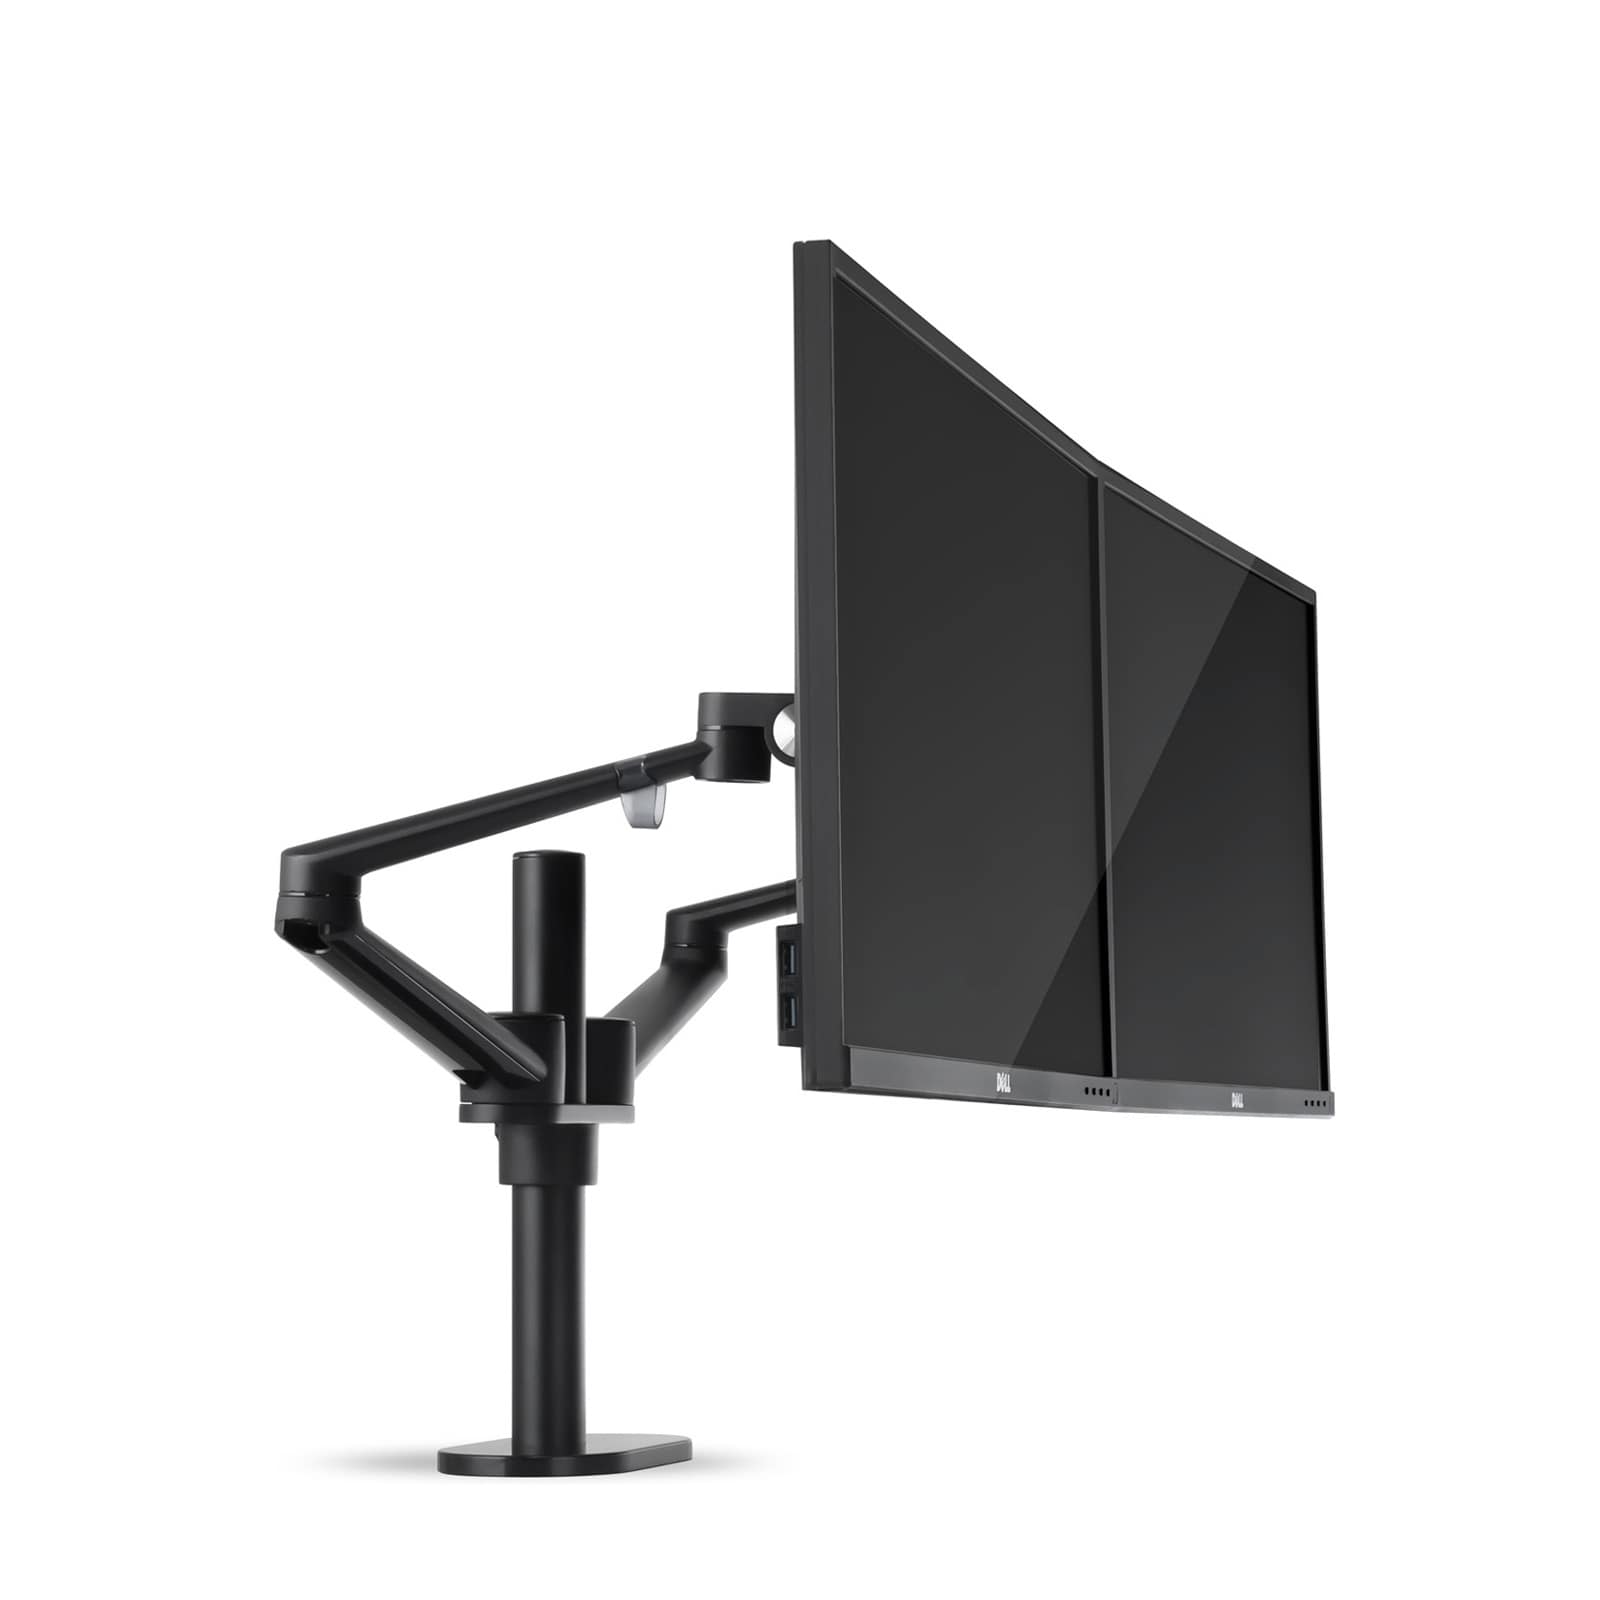 Double arm stand for OPE-19 monitors